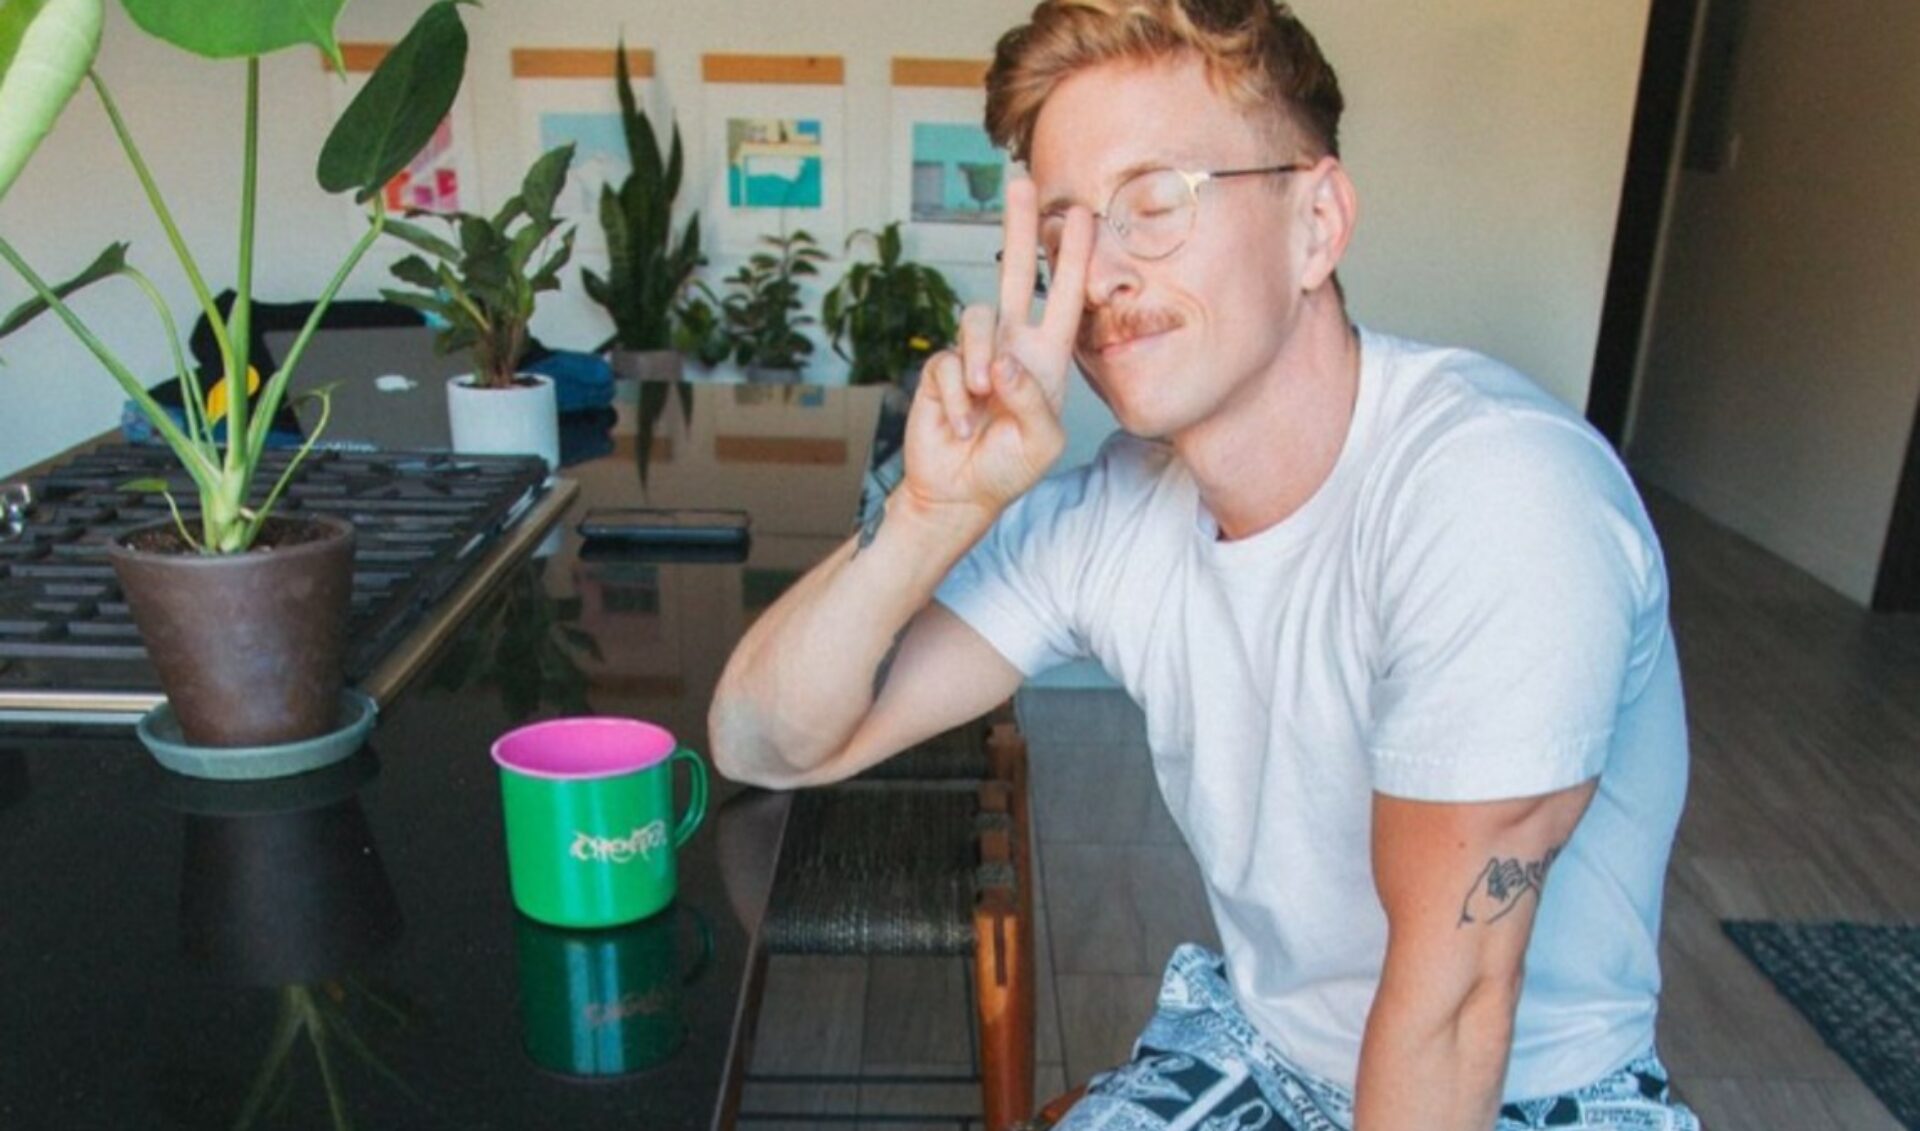 Tyler Oakley Announces Indefinite YouTube Hiatus To Pursue “Some Fun New Little Things”